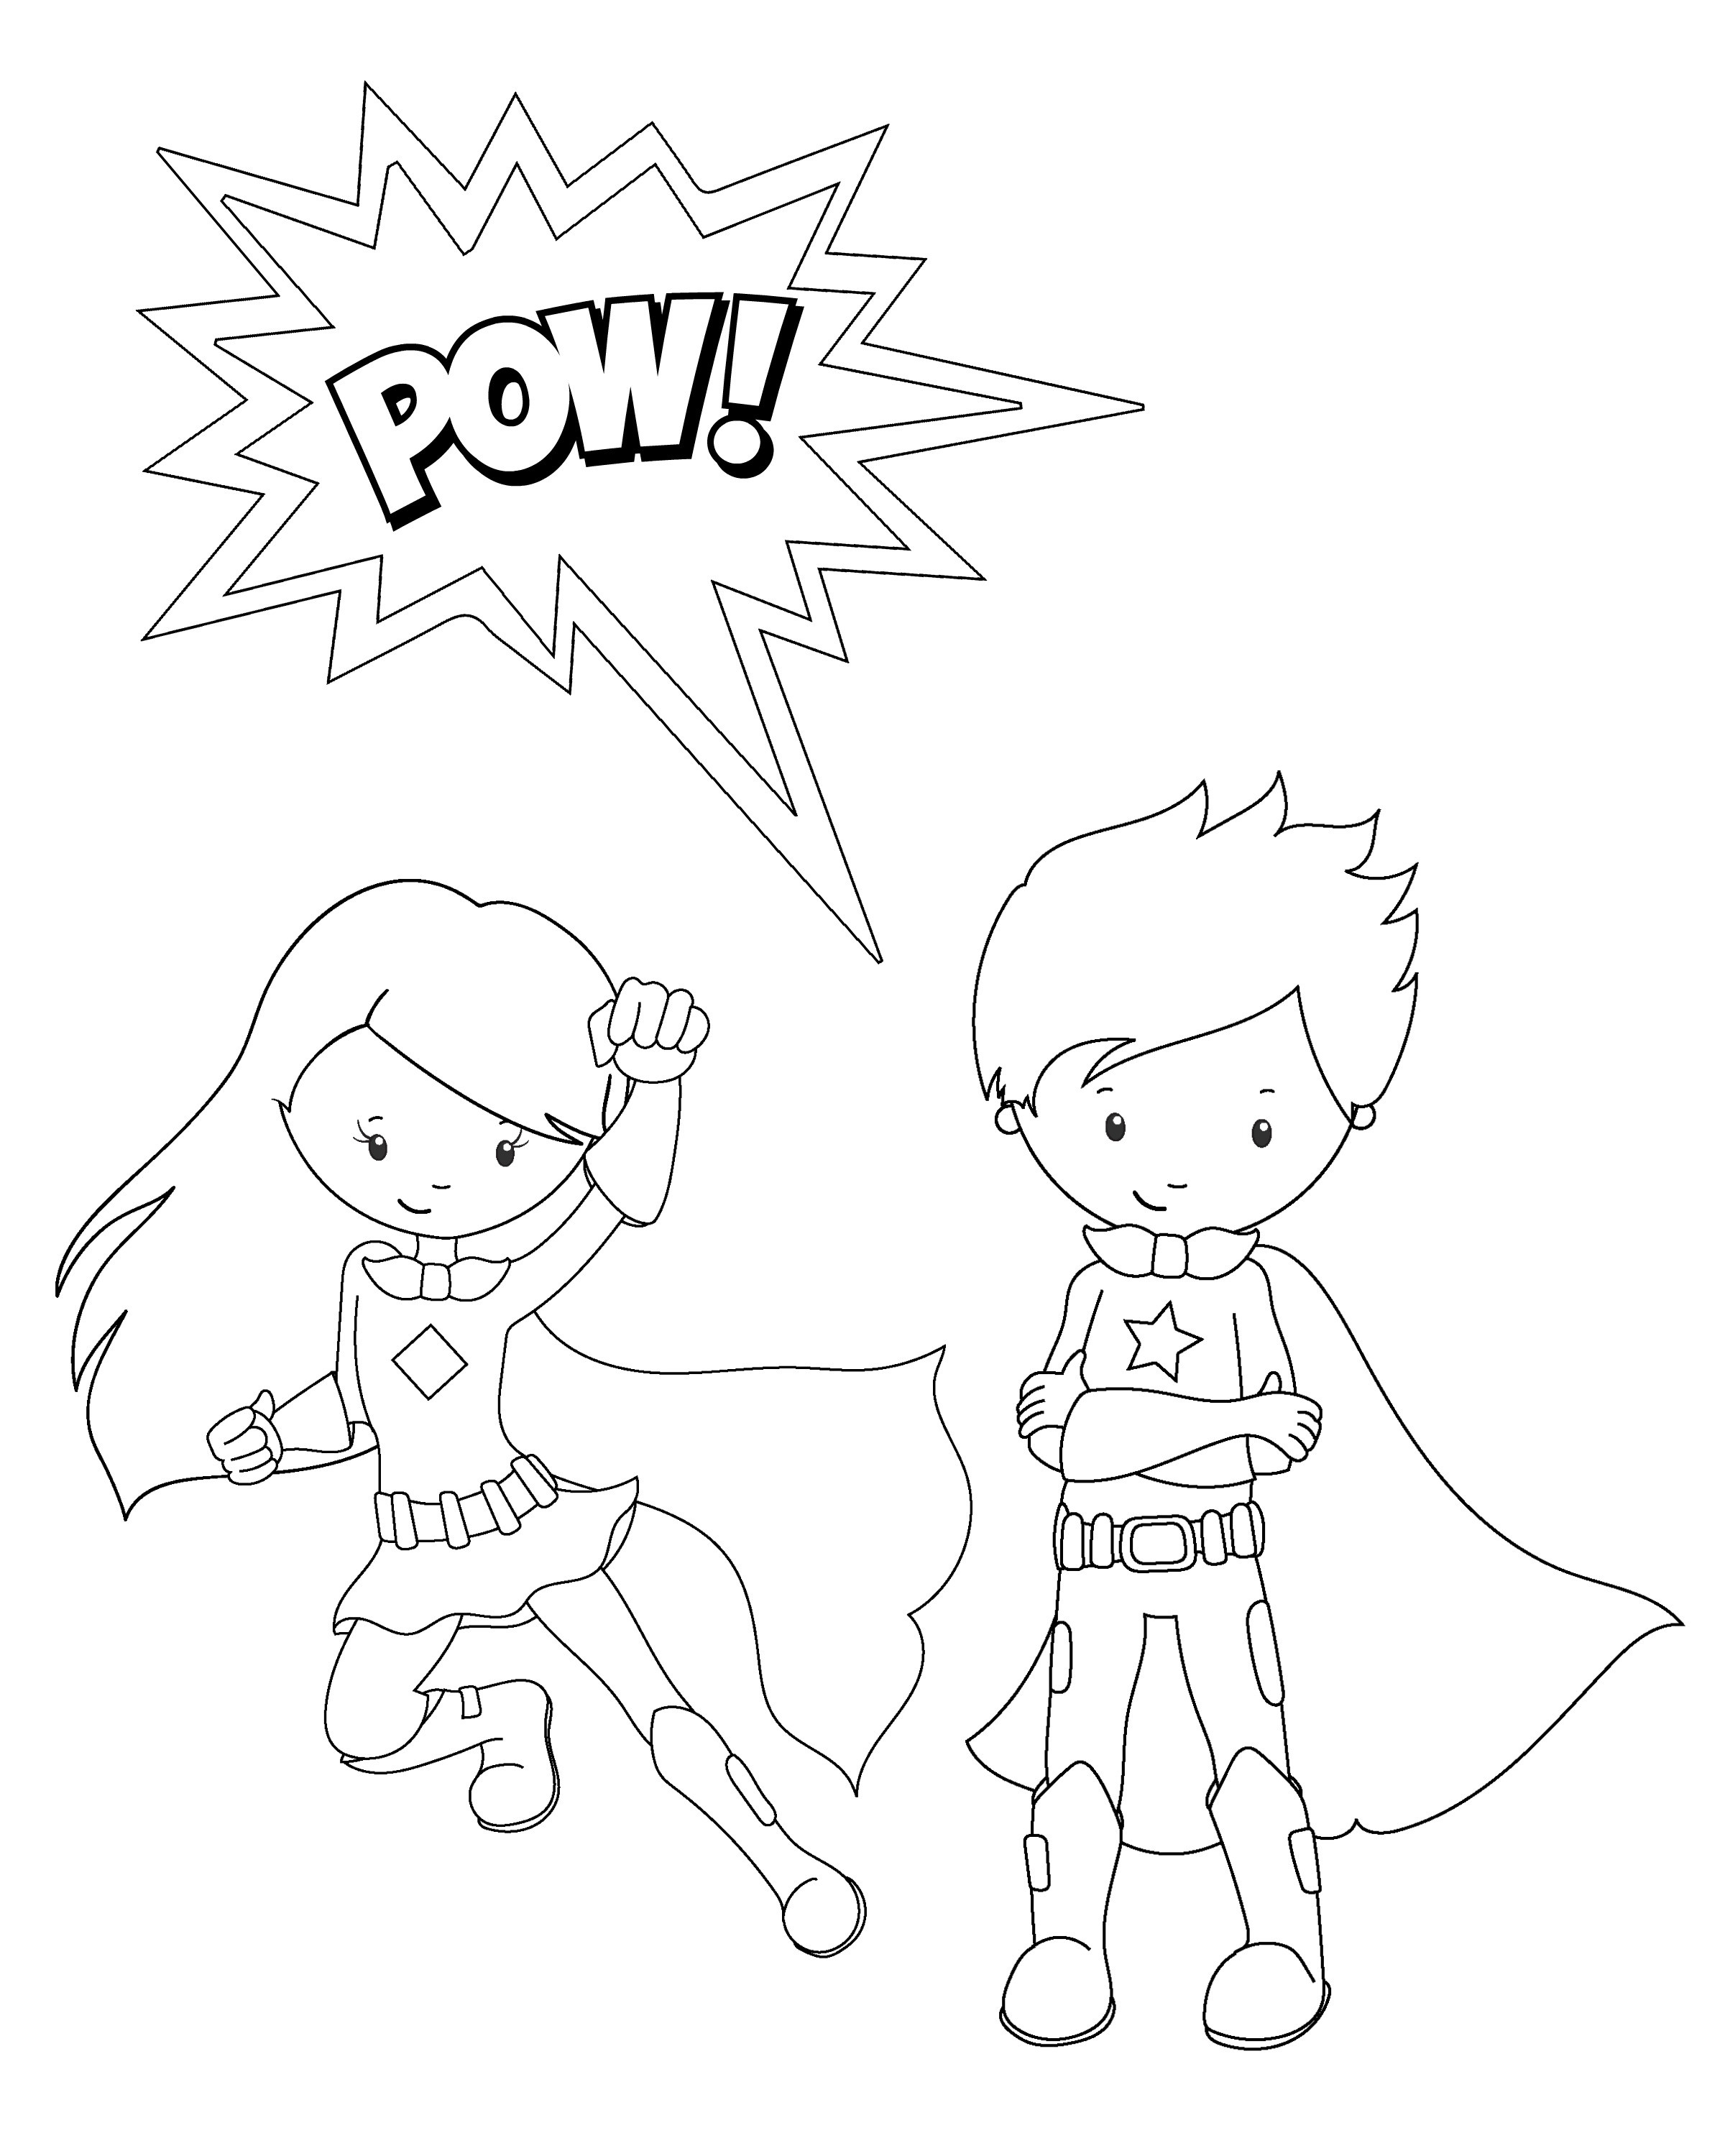 Coloring Pages For Boys Superheros
 Free Printable Superhero Coloring Sheets for Kids Crazy